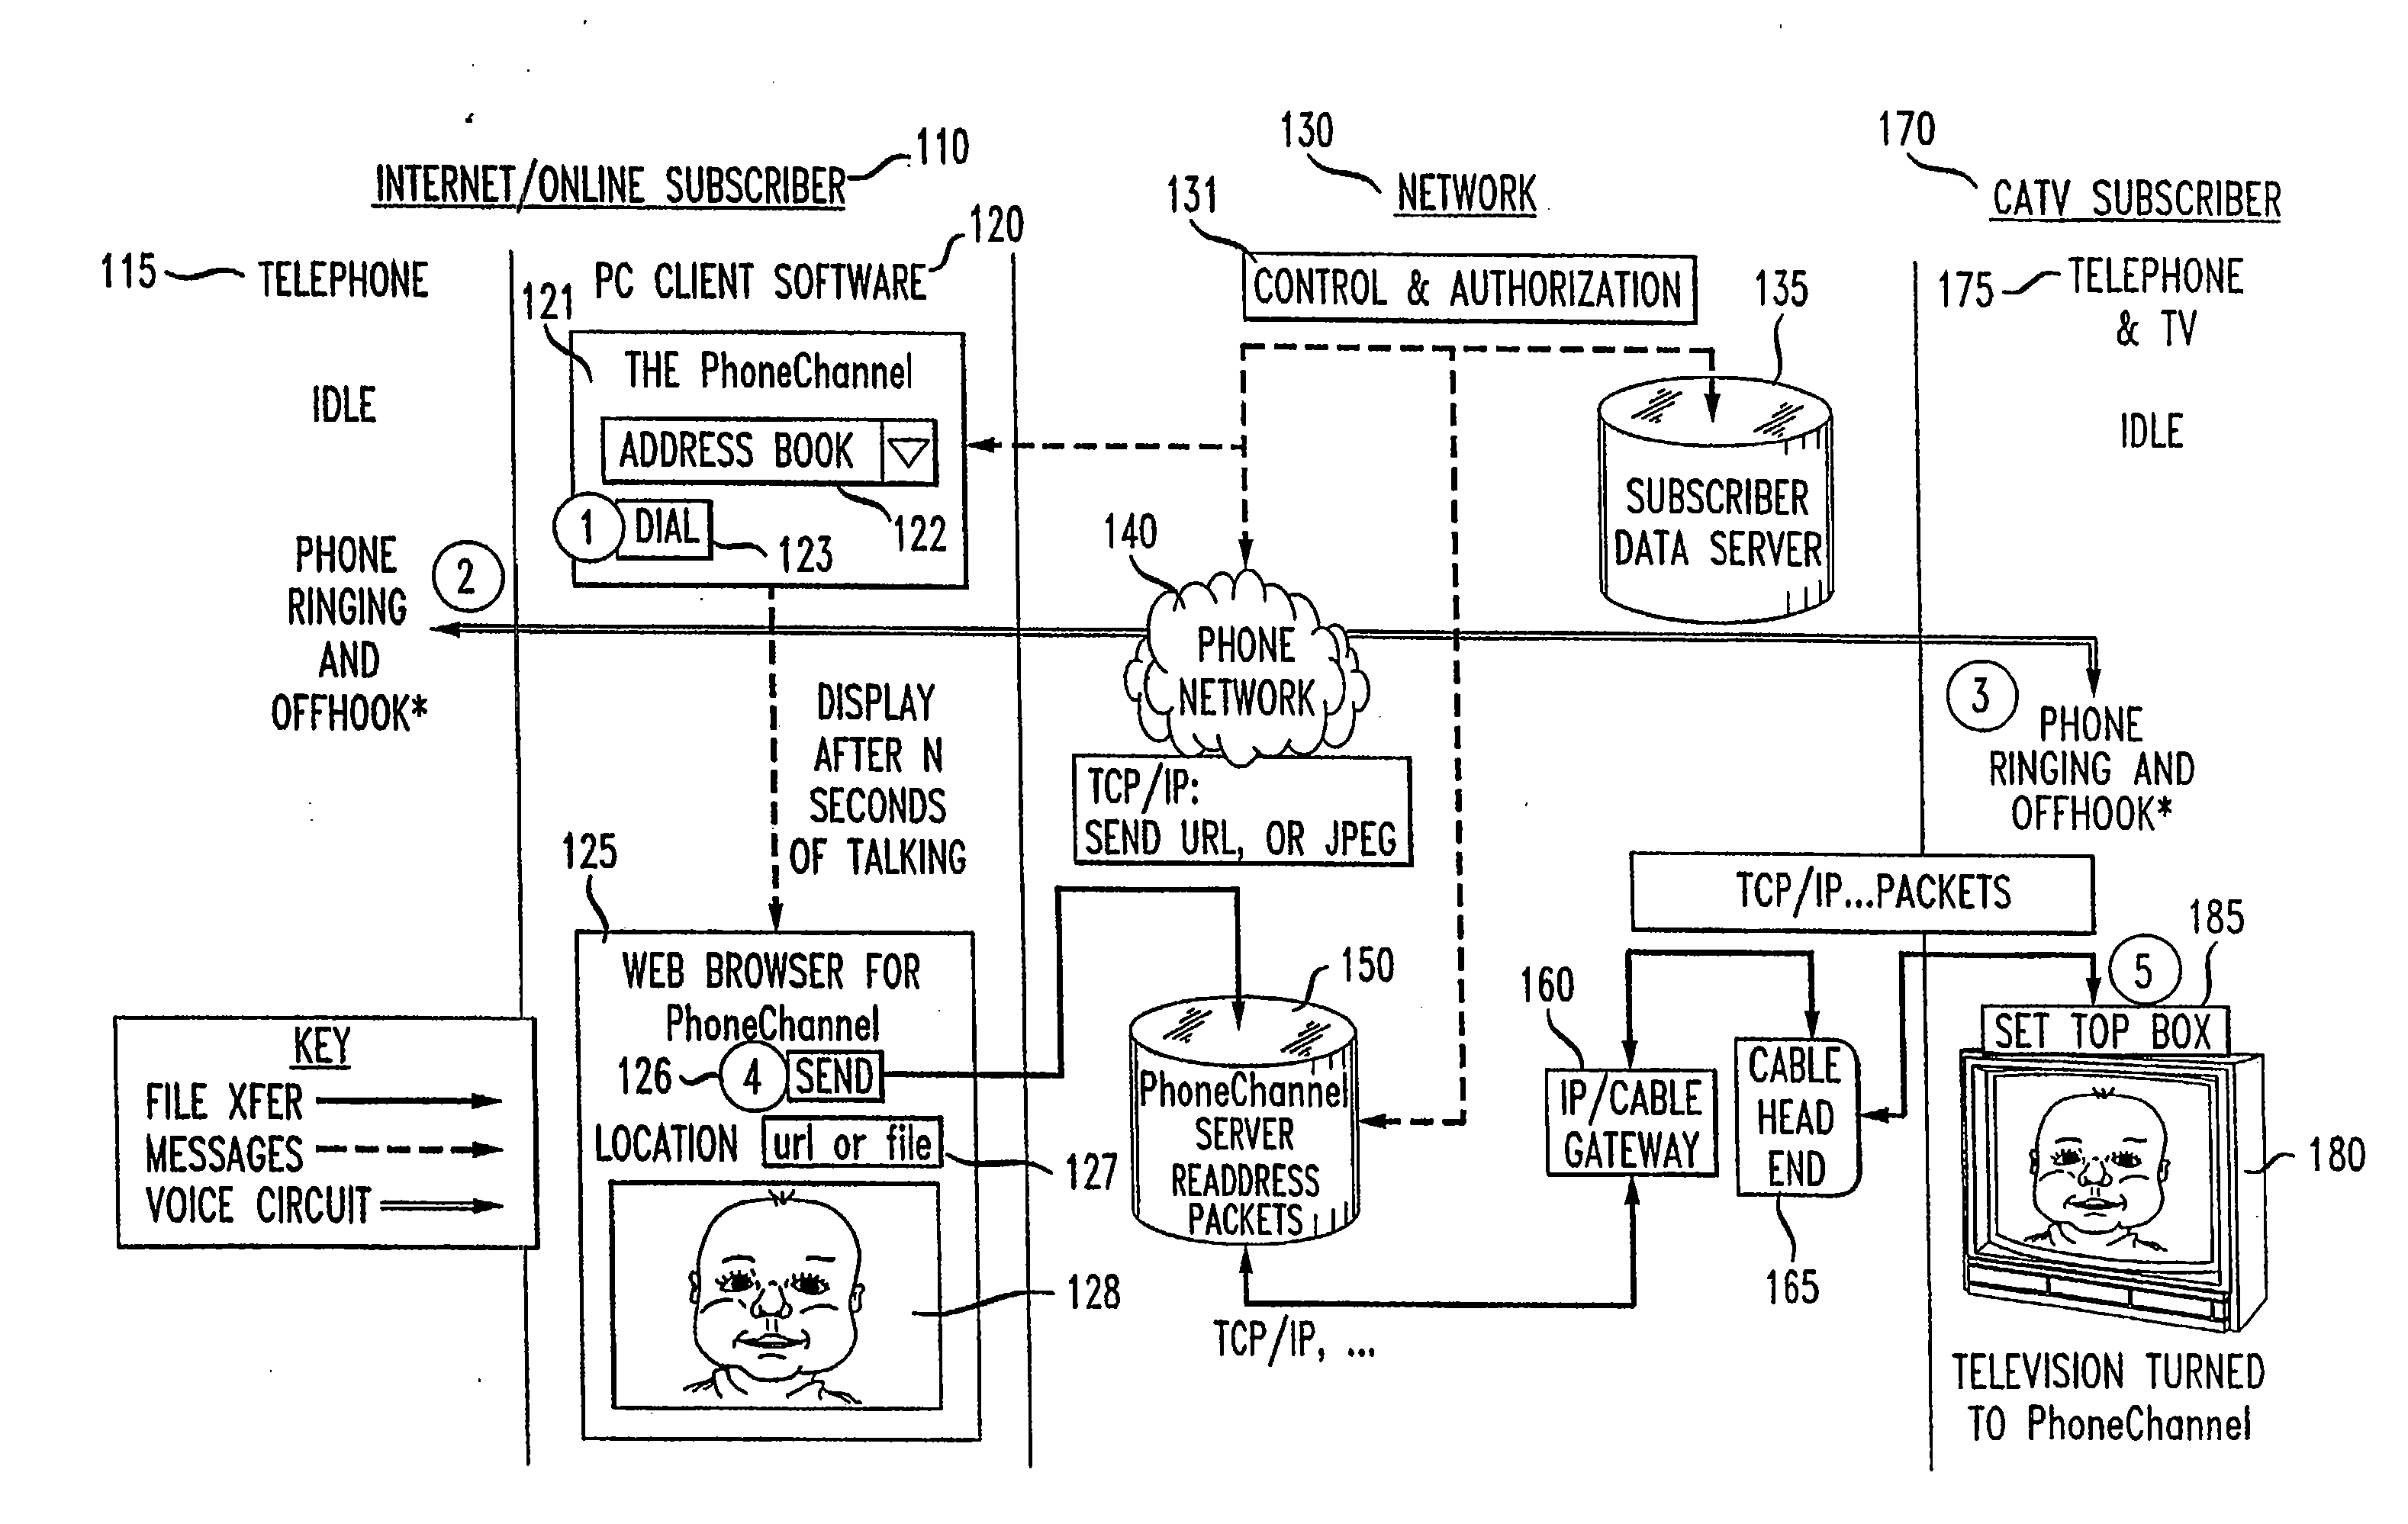 System and Method for Sharing Information